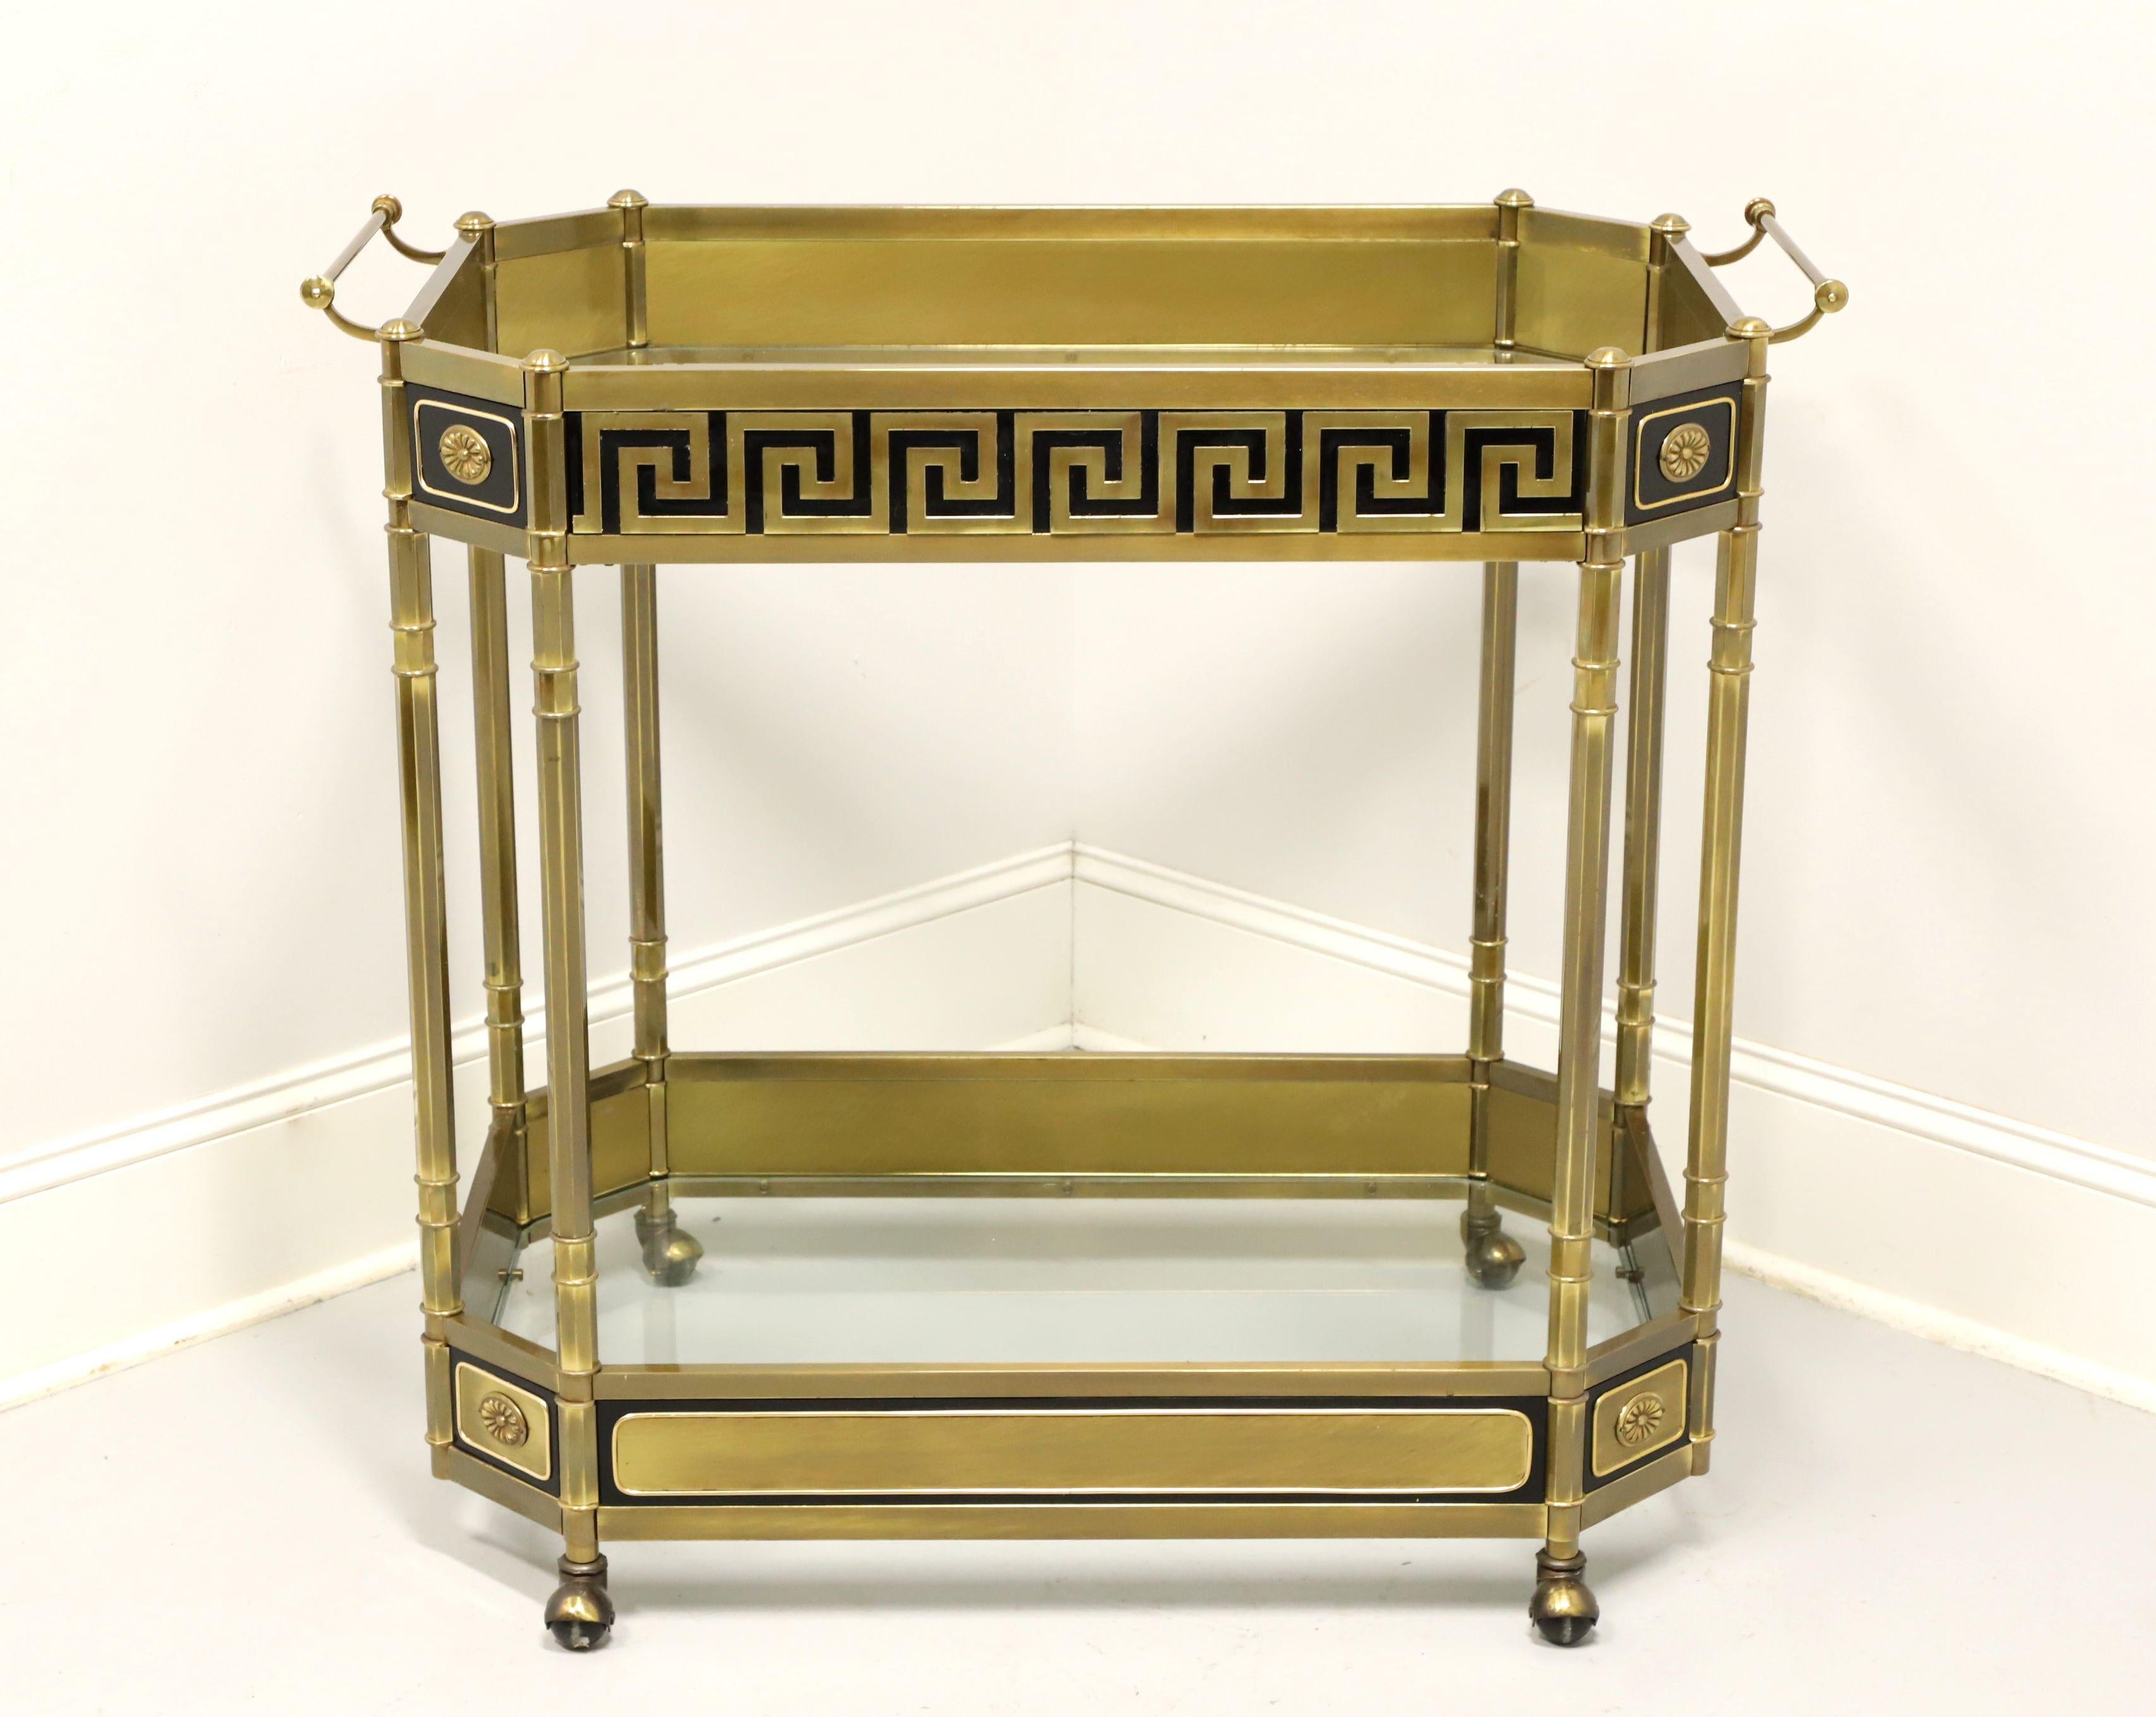 A Neoclassical style rolling bar cart by Mastercraft. Solid brass with glass top, rectangular shape, clipped corners, glass lower shelf, Dual brass handles, and four casters. Features Greek Key & Neoclassical details and a short upper & lower